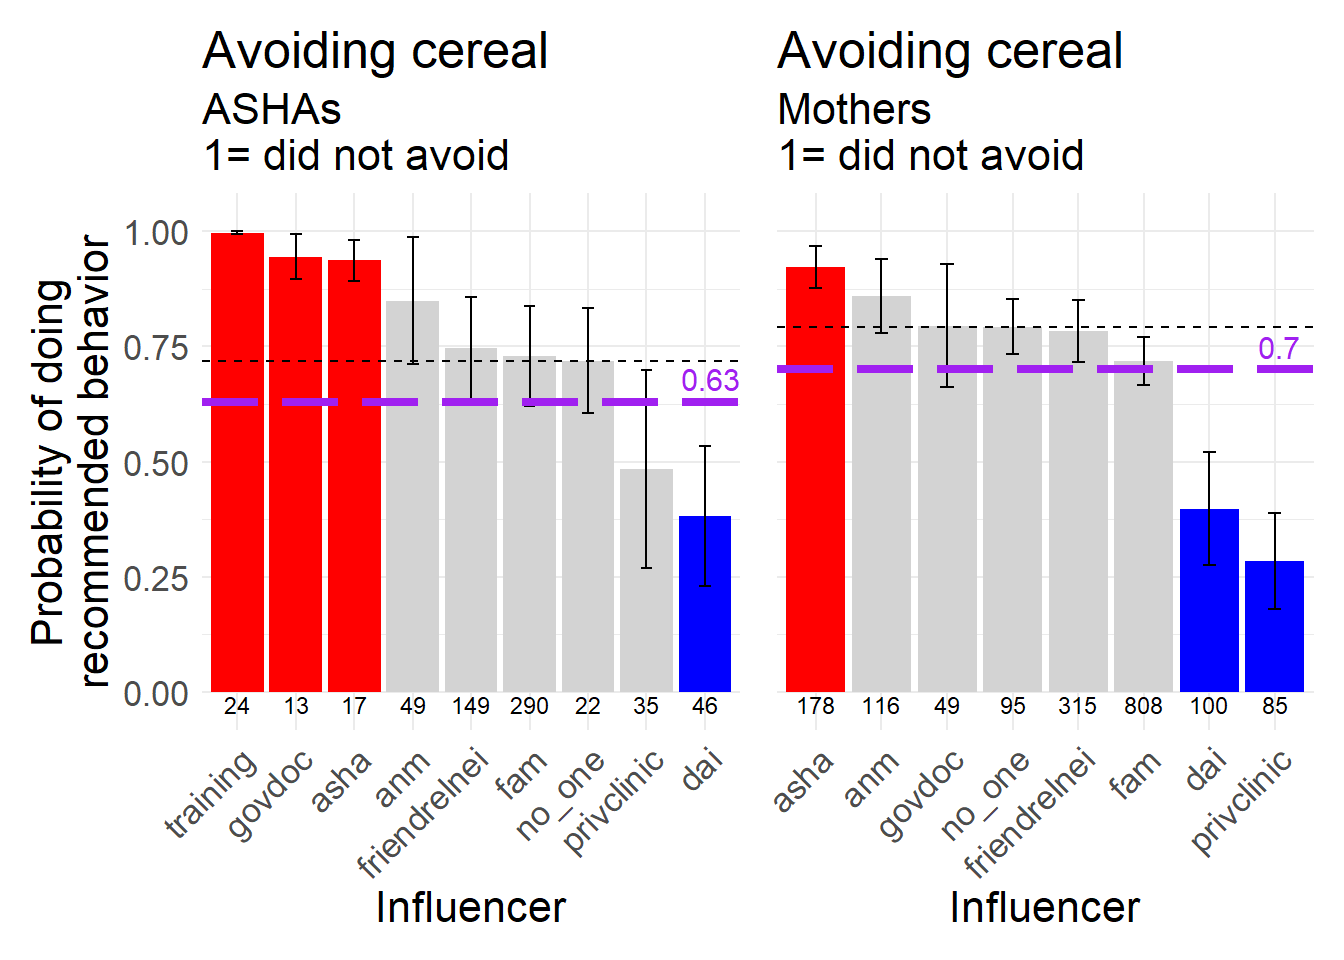 Avoidng cereal-based foods after delivery, a behavior biomedically recommended not to do, 1 = did NOT avoid.